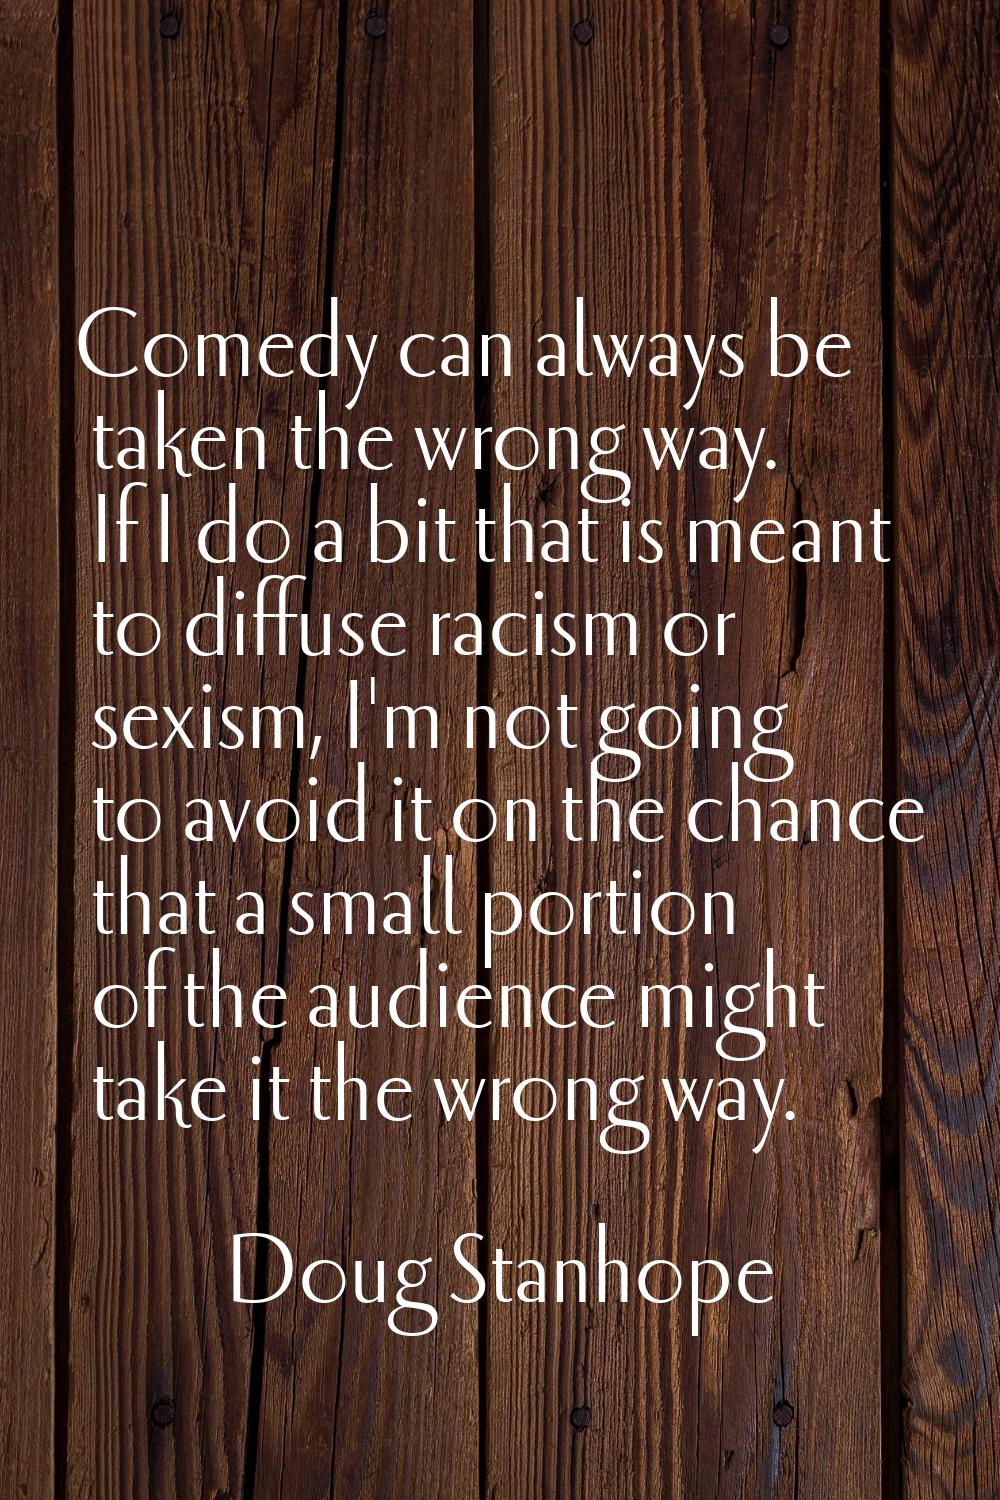 Comedy can always be taken the wrong way. If I do a bit that is meant to diffuse racism or sexism, 